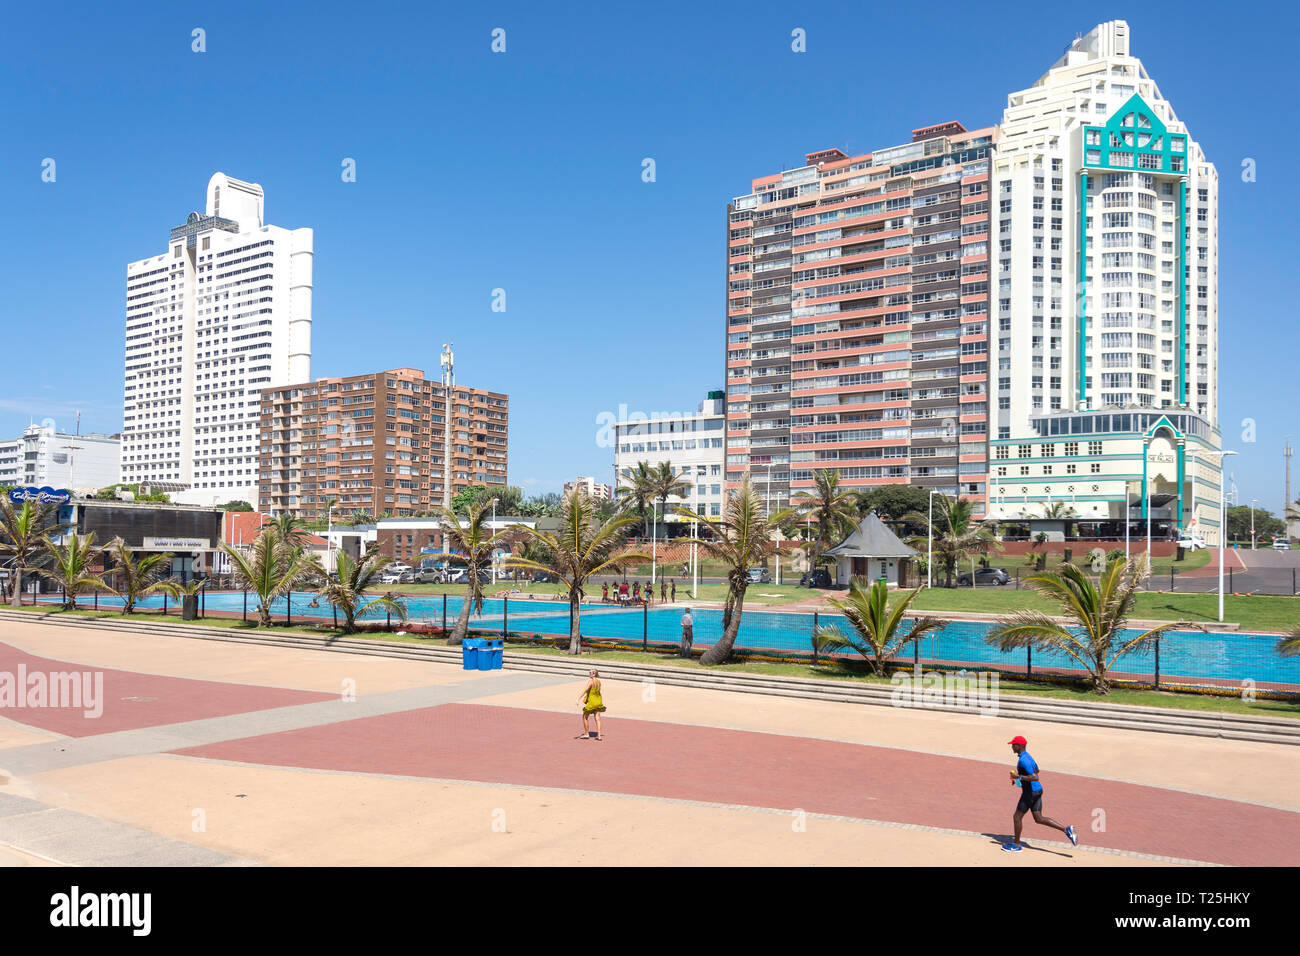 Rachel Finlayson outdoor swimming pool, Snell Parade, Durban, KwaZulu-Natal, South Africa Stock Photo